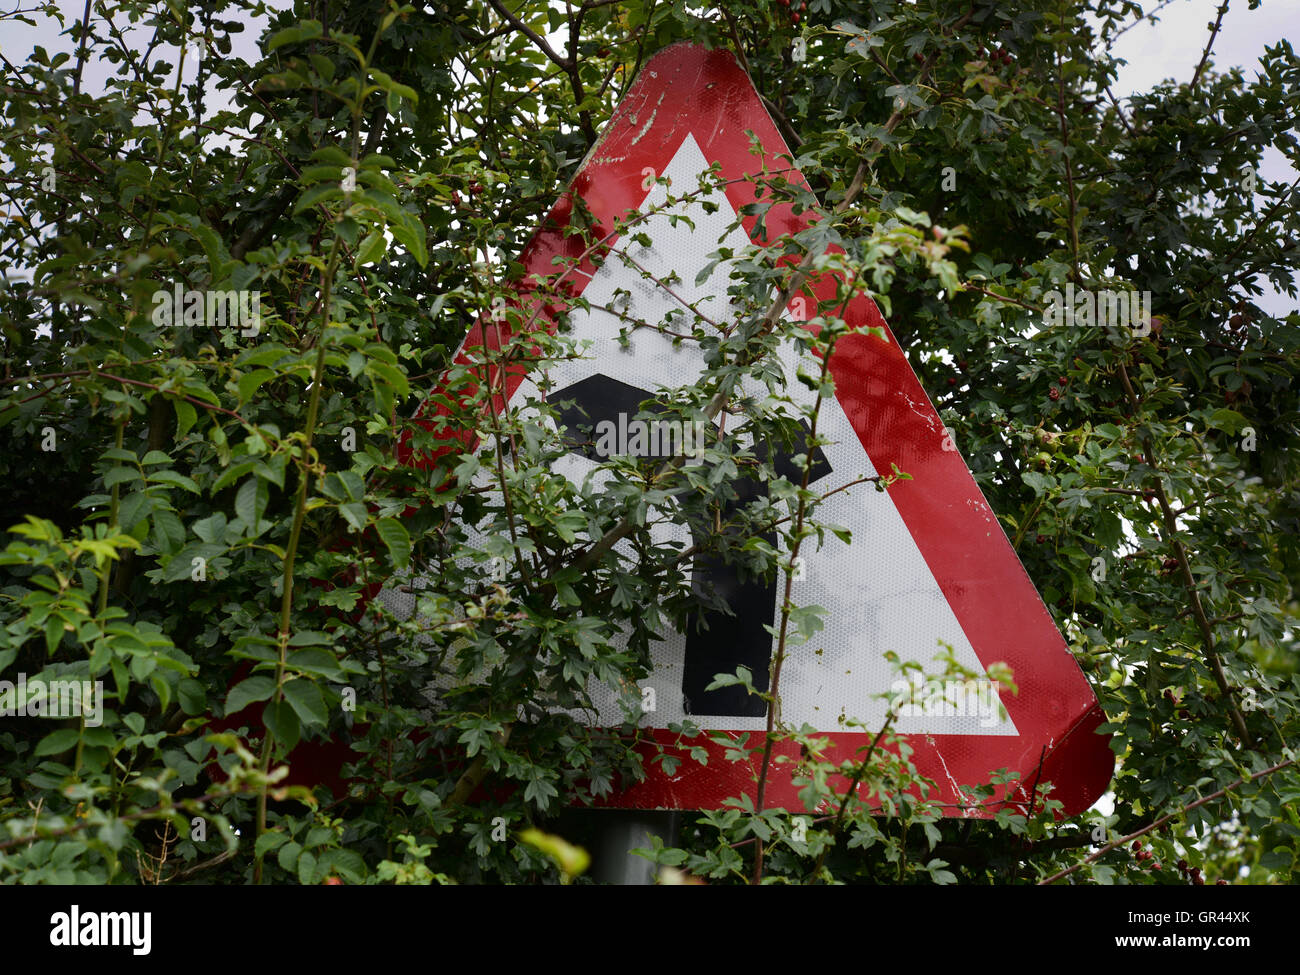 An obscured warning sign from the Highway Code, junction on bend ahead. Stock Photo